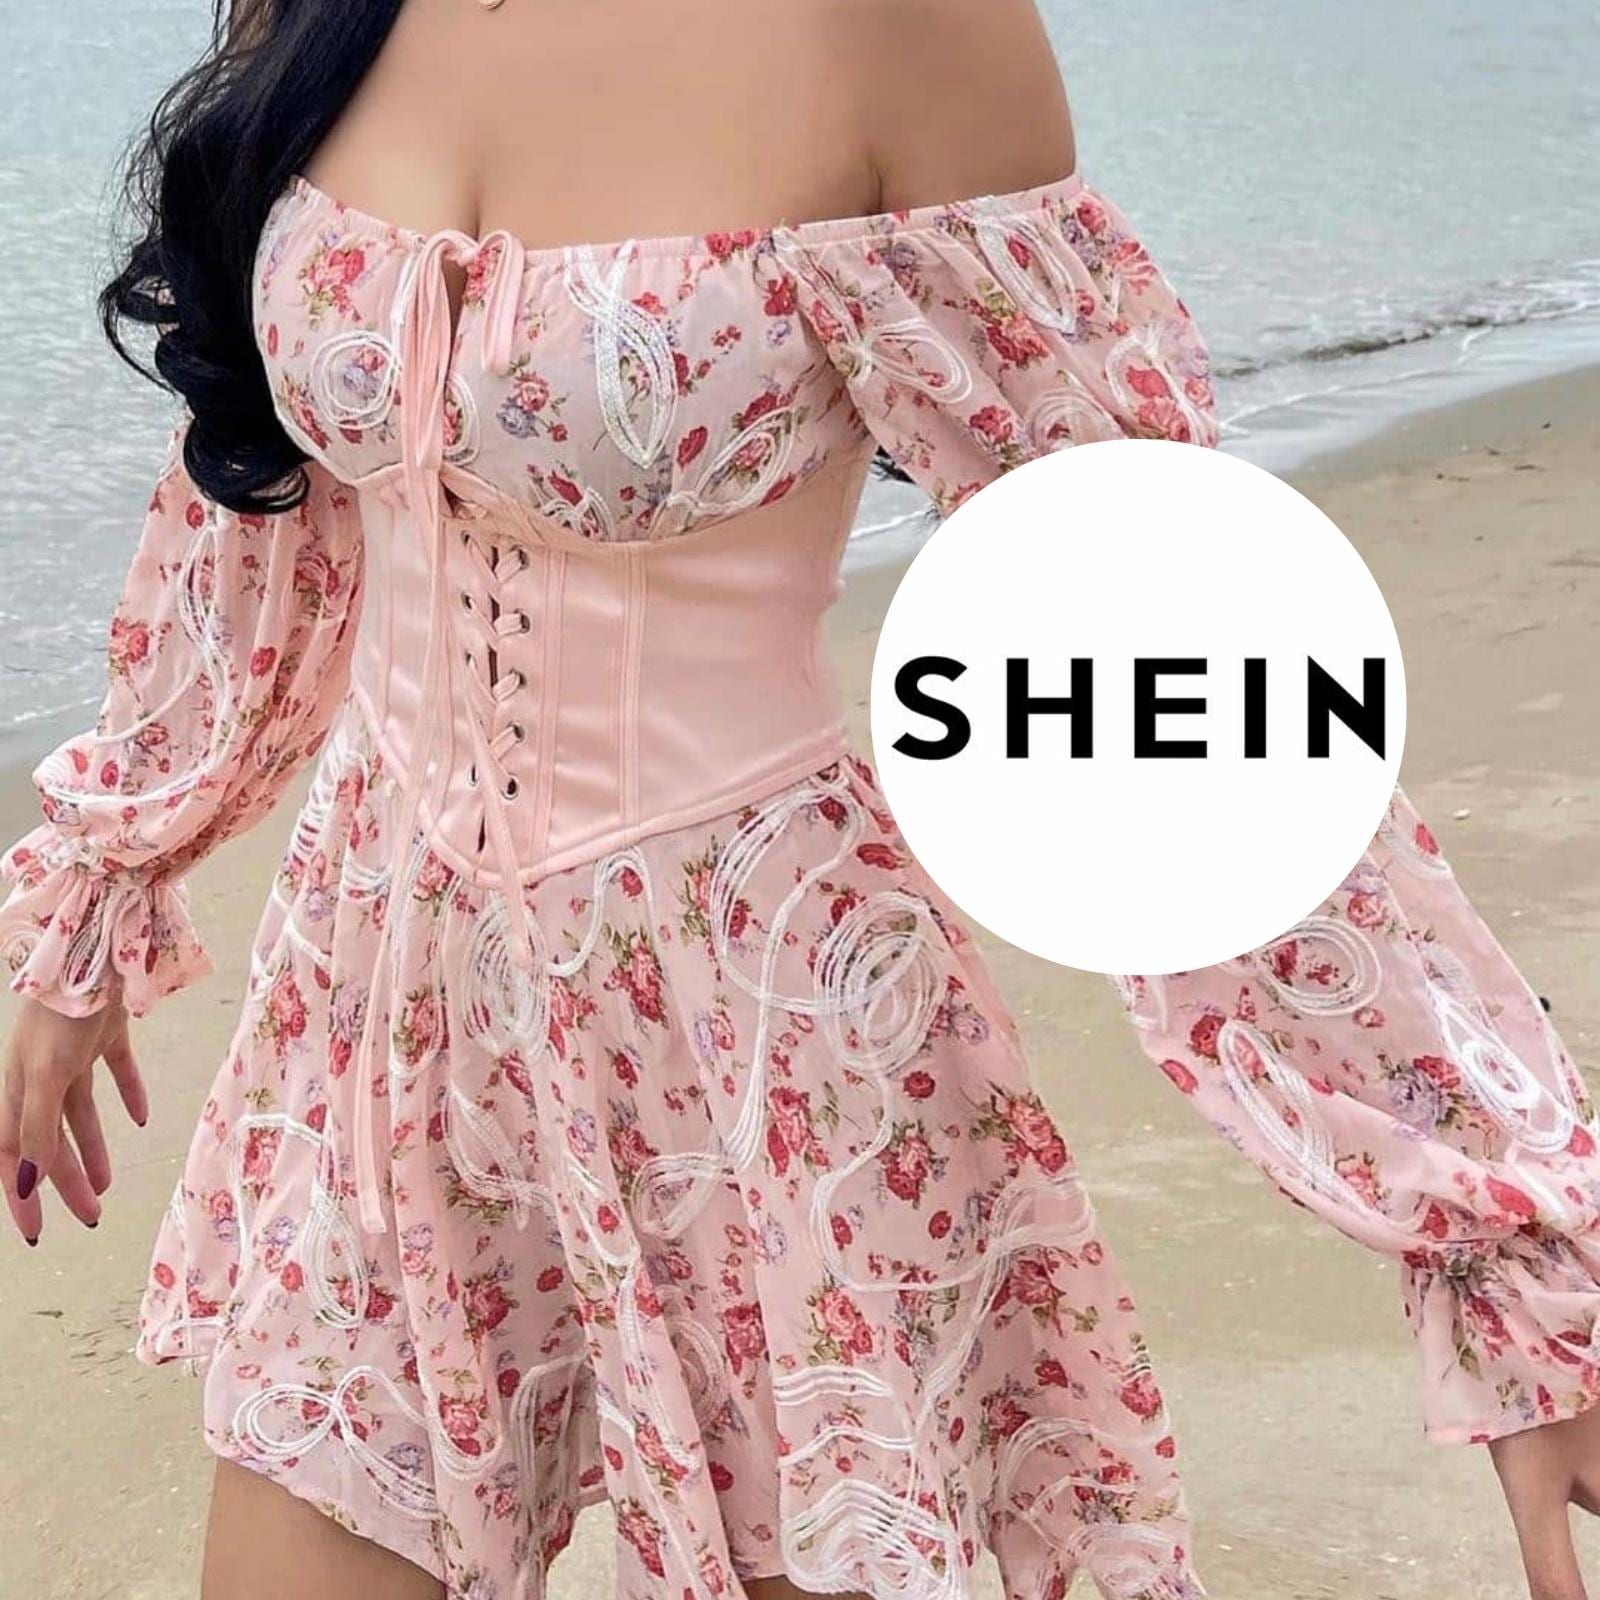 Shein is Back in India. But is the Clothing Giant Good for the Environment?